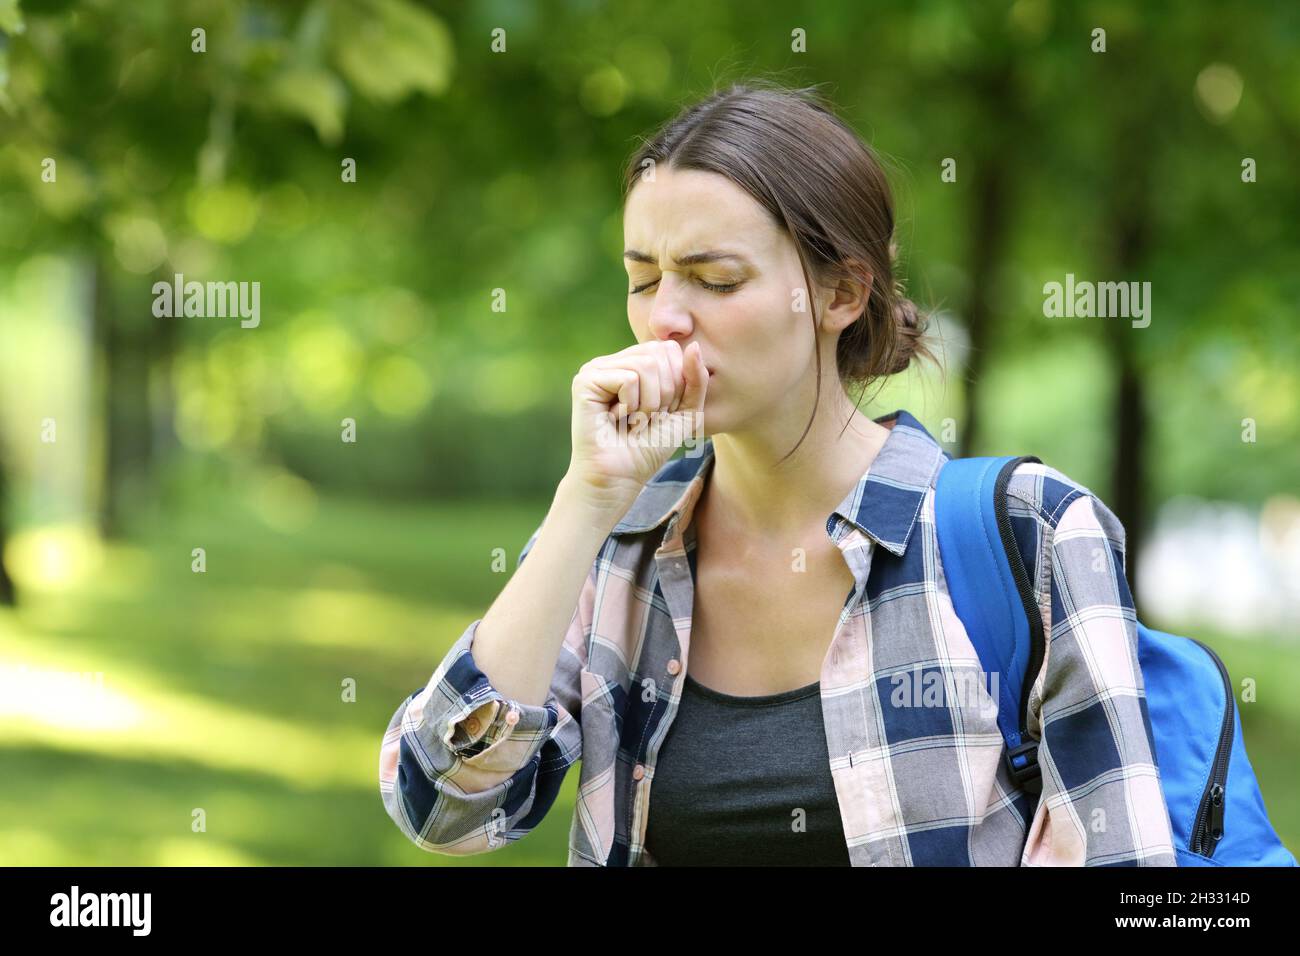 Ill student coughing walking in a campus Stock Photo